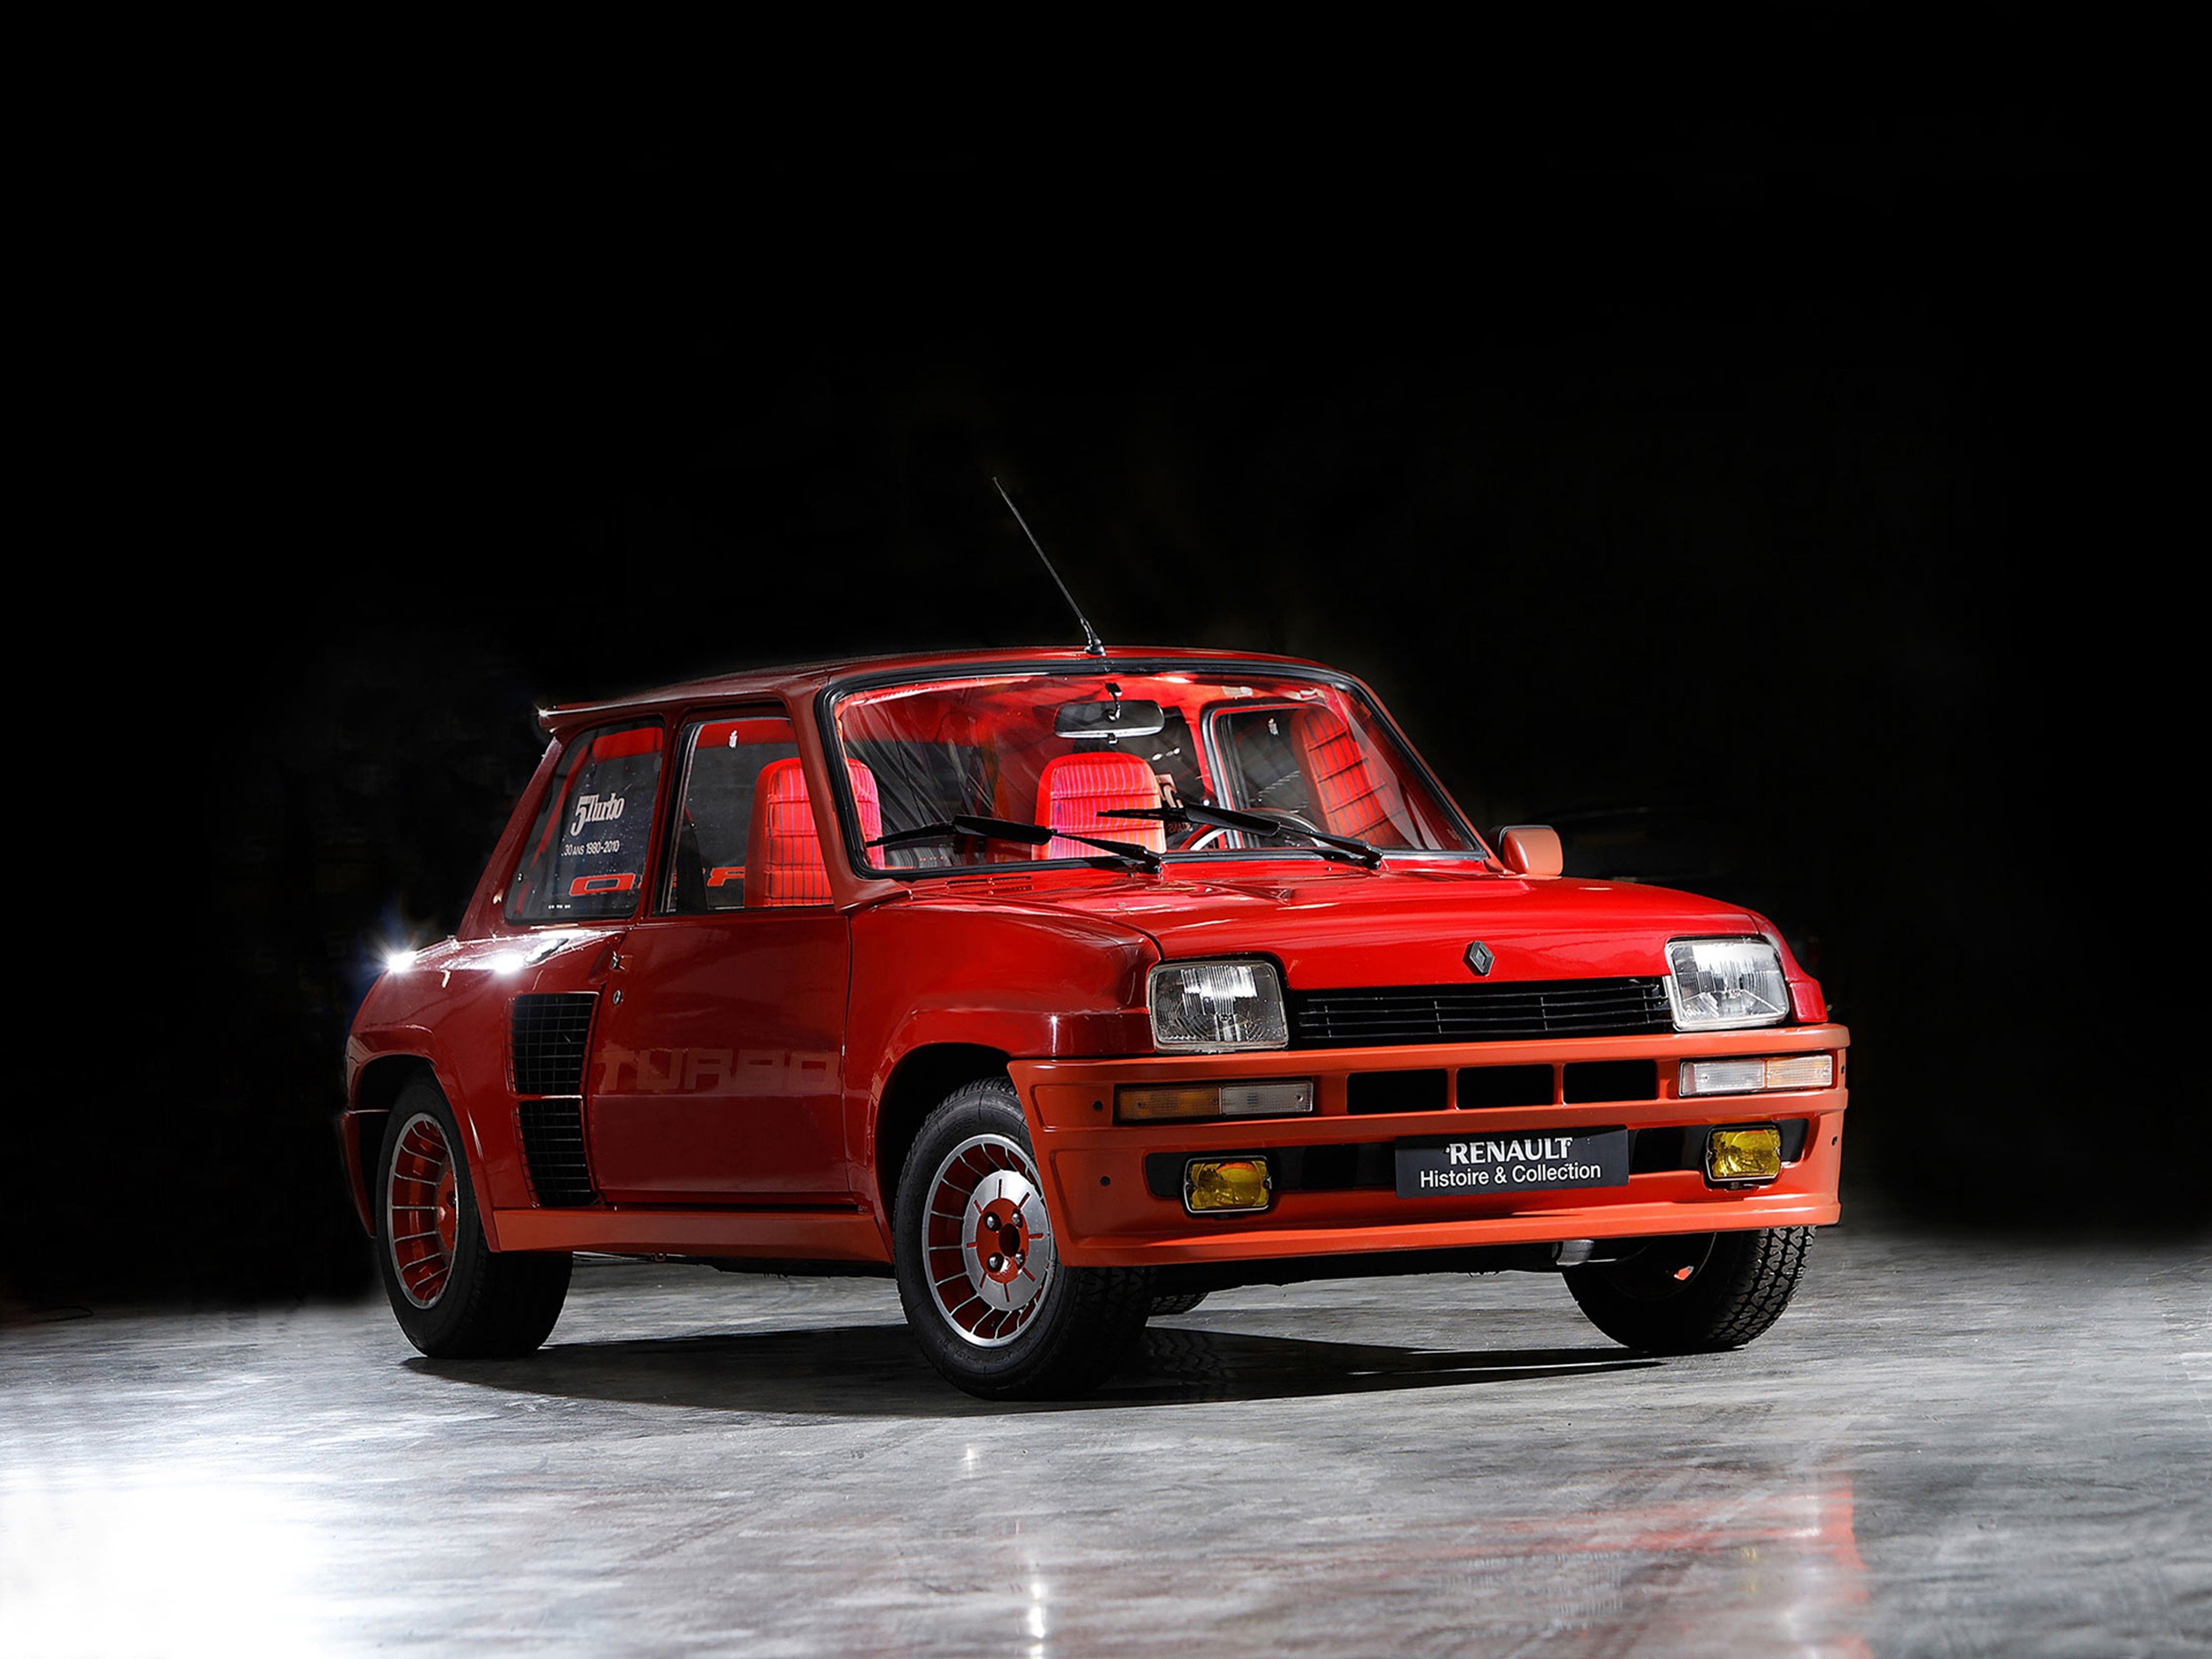 1979 1984 Renault 5 Turbo Car Supercar Red 4000x300 Wallpapers Hd Desktop And Mobile Backgrounds